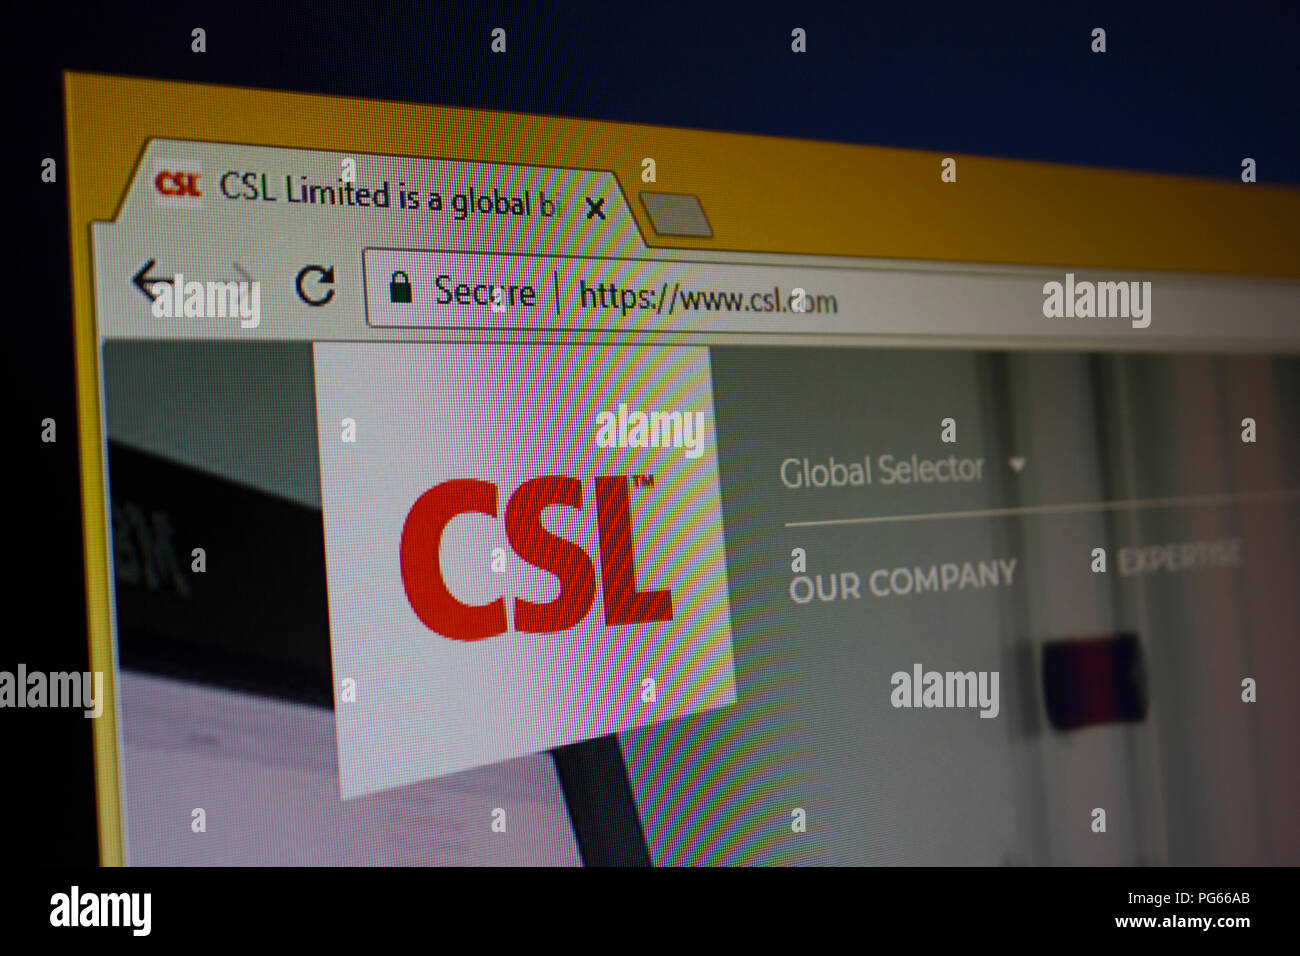 CSL Limited Website Homepage Stockfoto